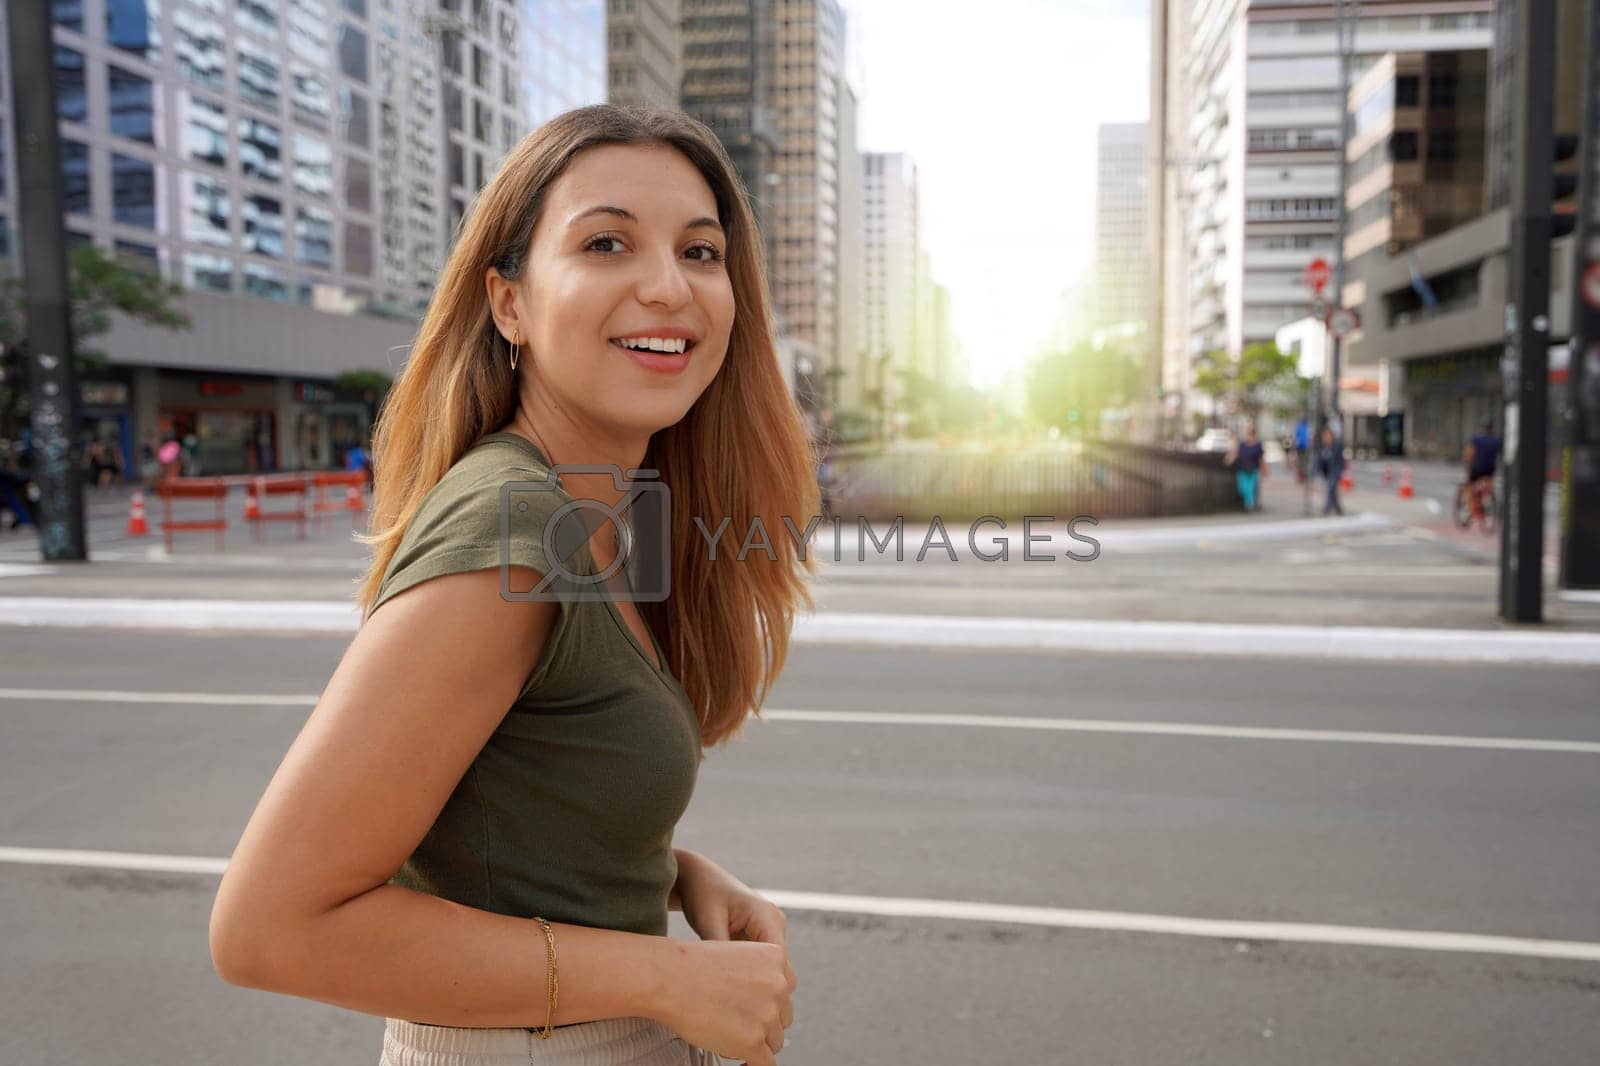 Royalty free image of Brazilian self-confident young woman smiling at camera with Paulista Avenue on the background in the morning, Sao Paulo, Brazil by sergio_monti